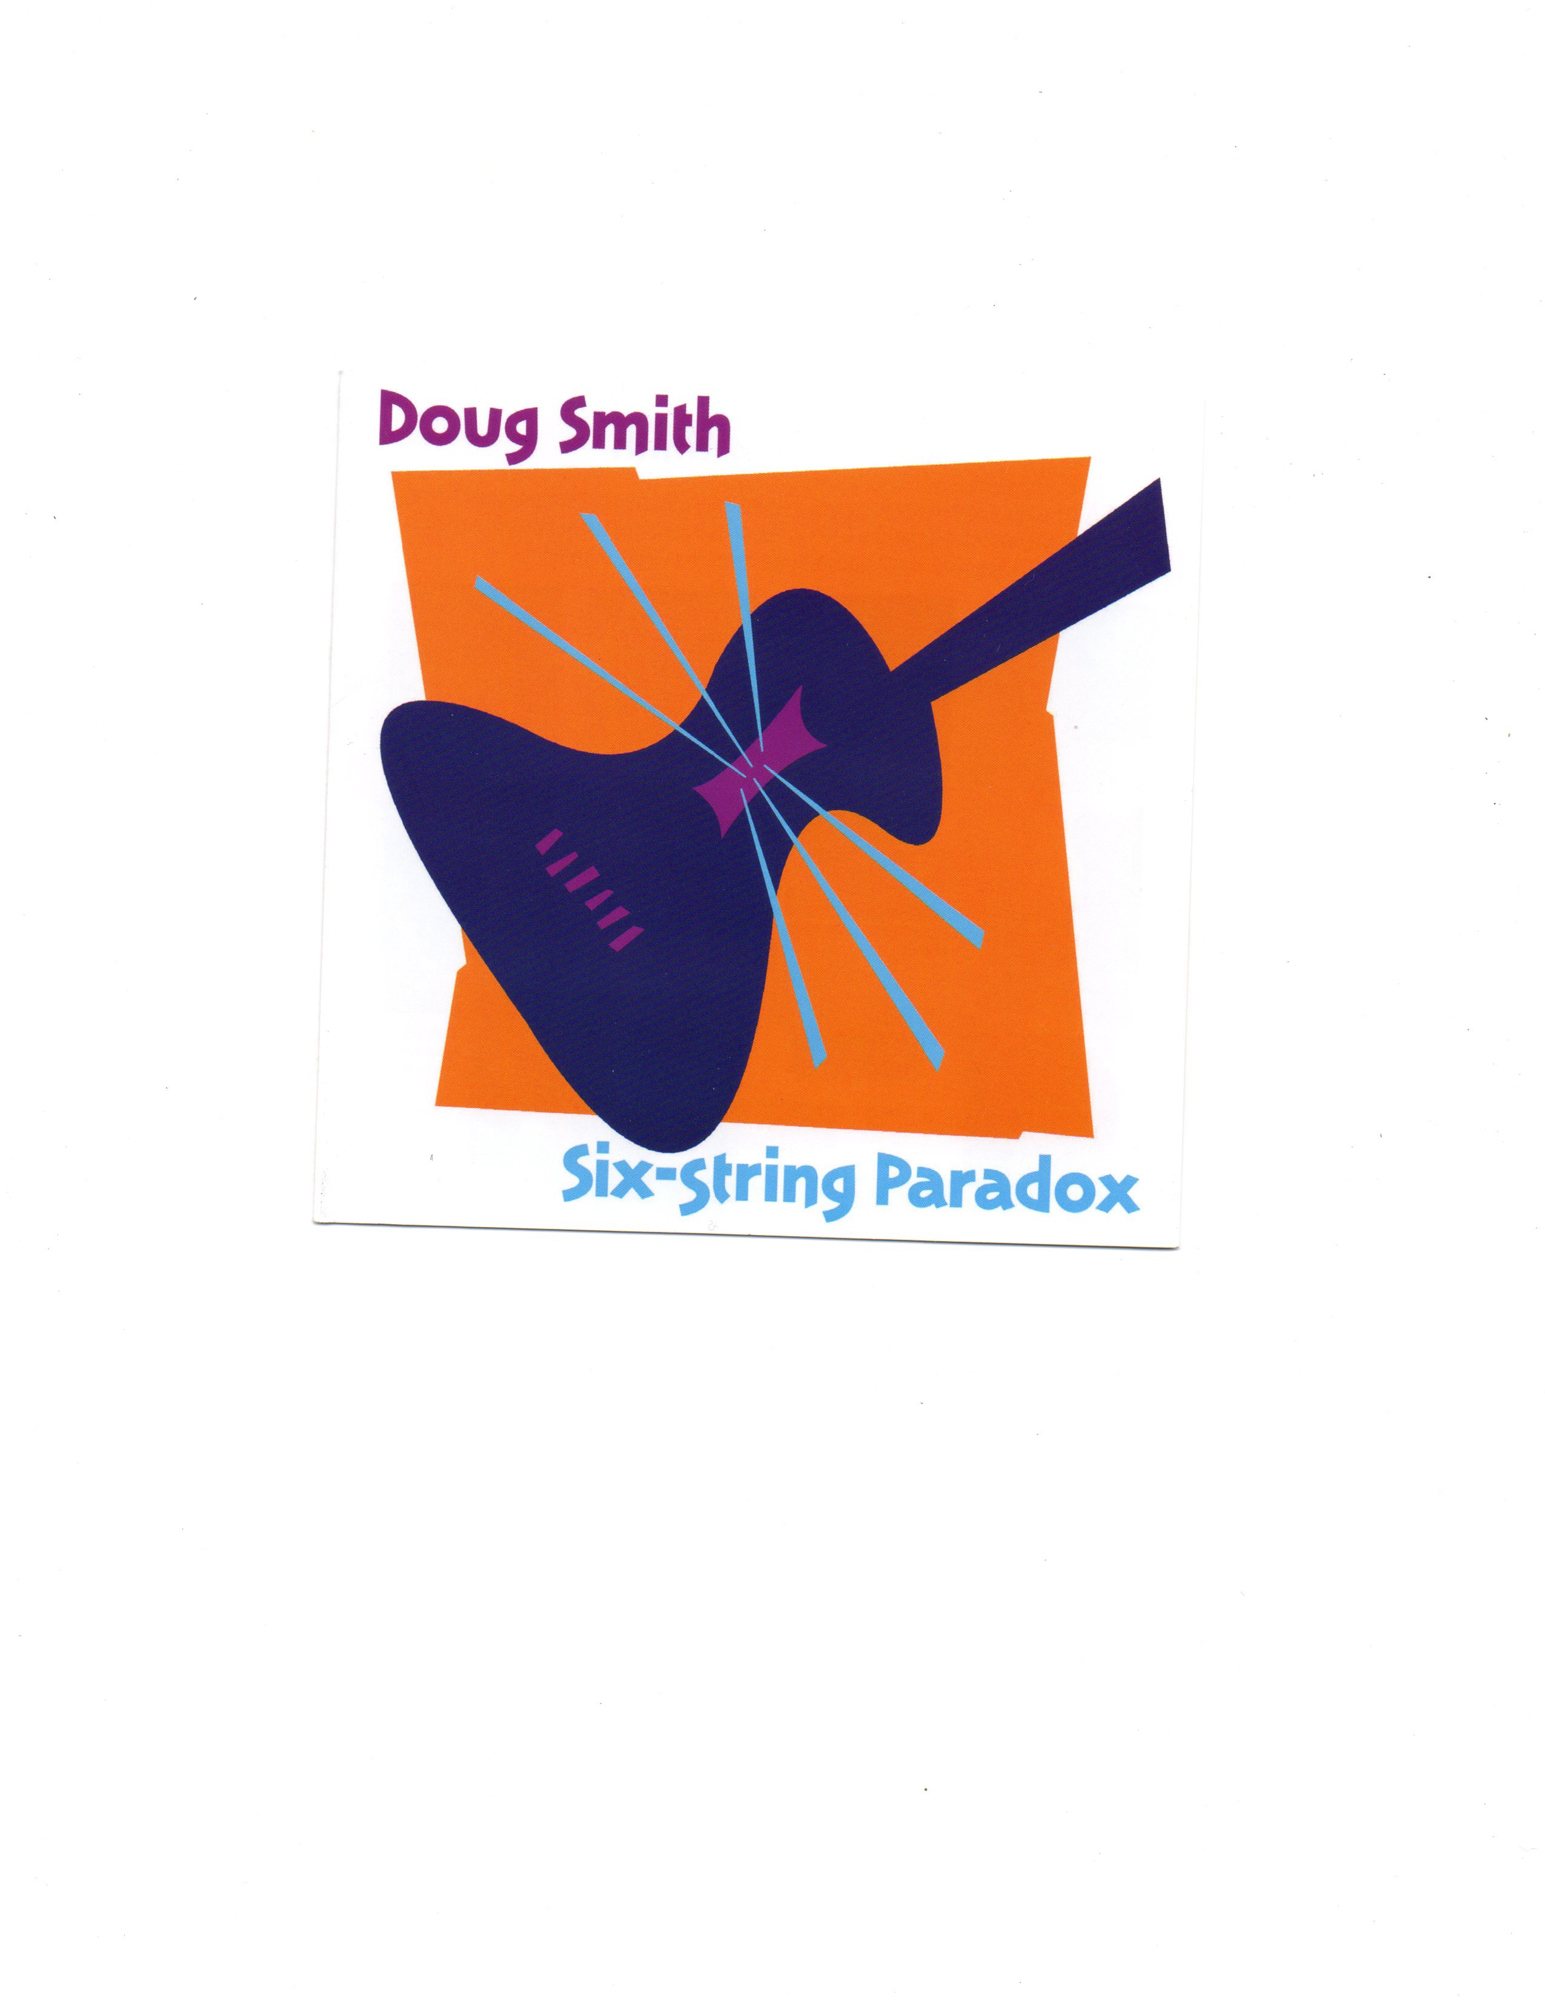 Doug Smith's new CD: &quot;Six-String Paradox&quot;